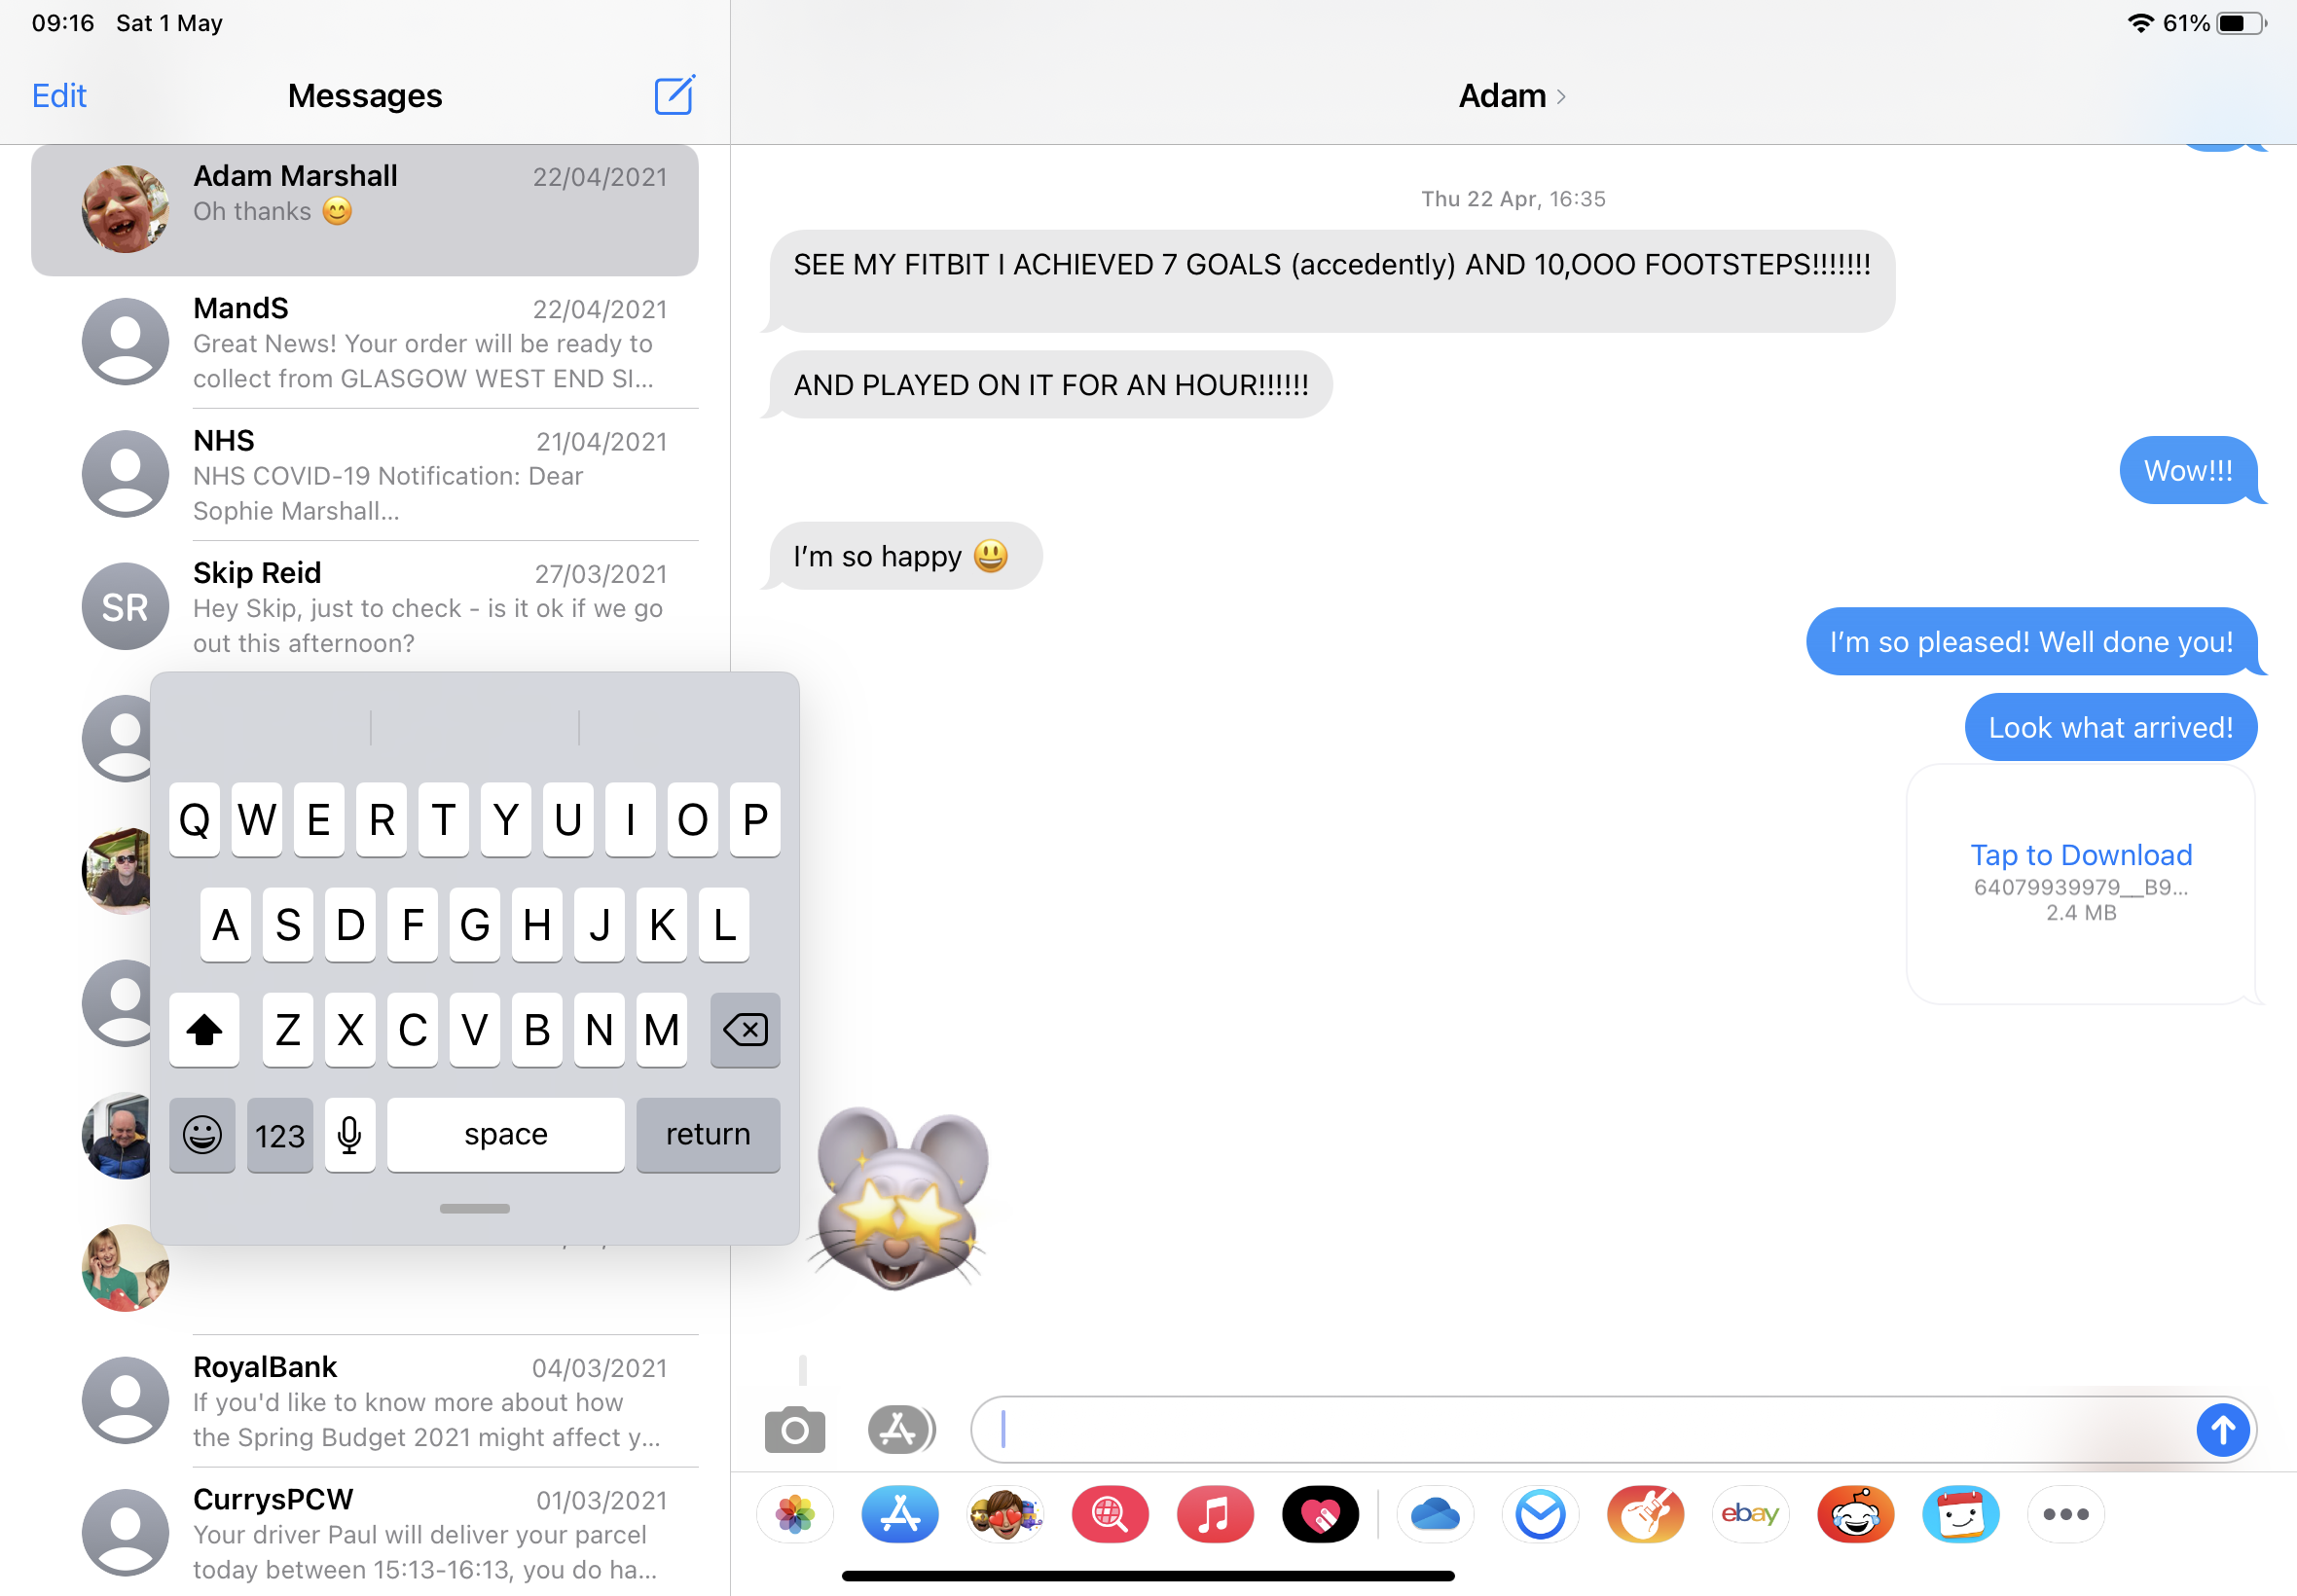 Floating keyboard on display in messages screen